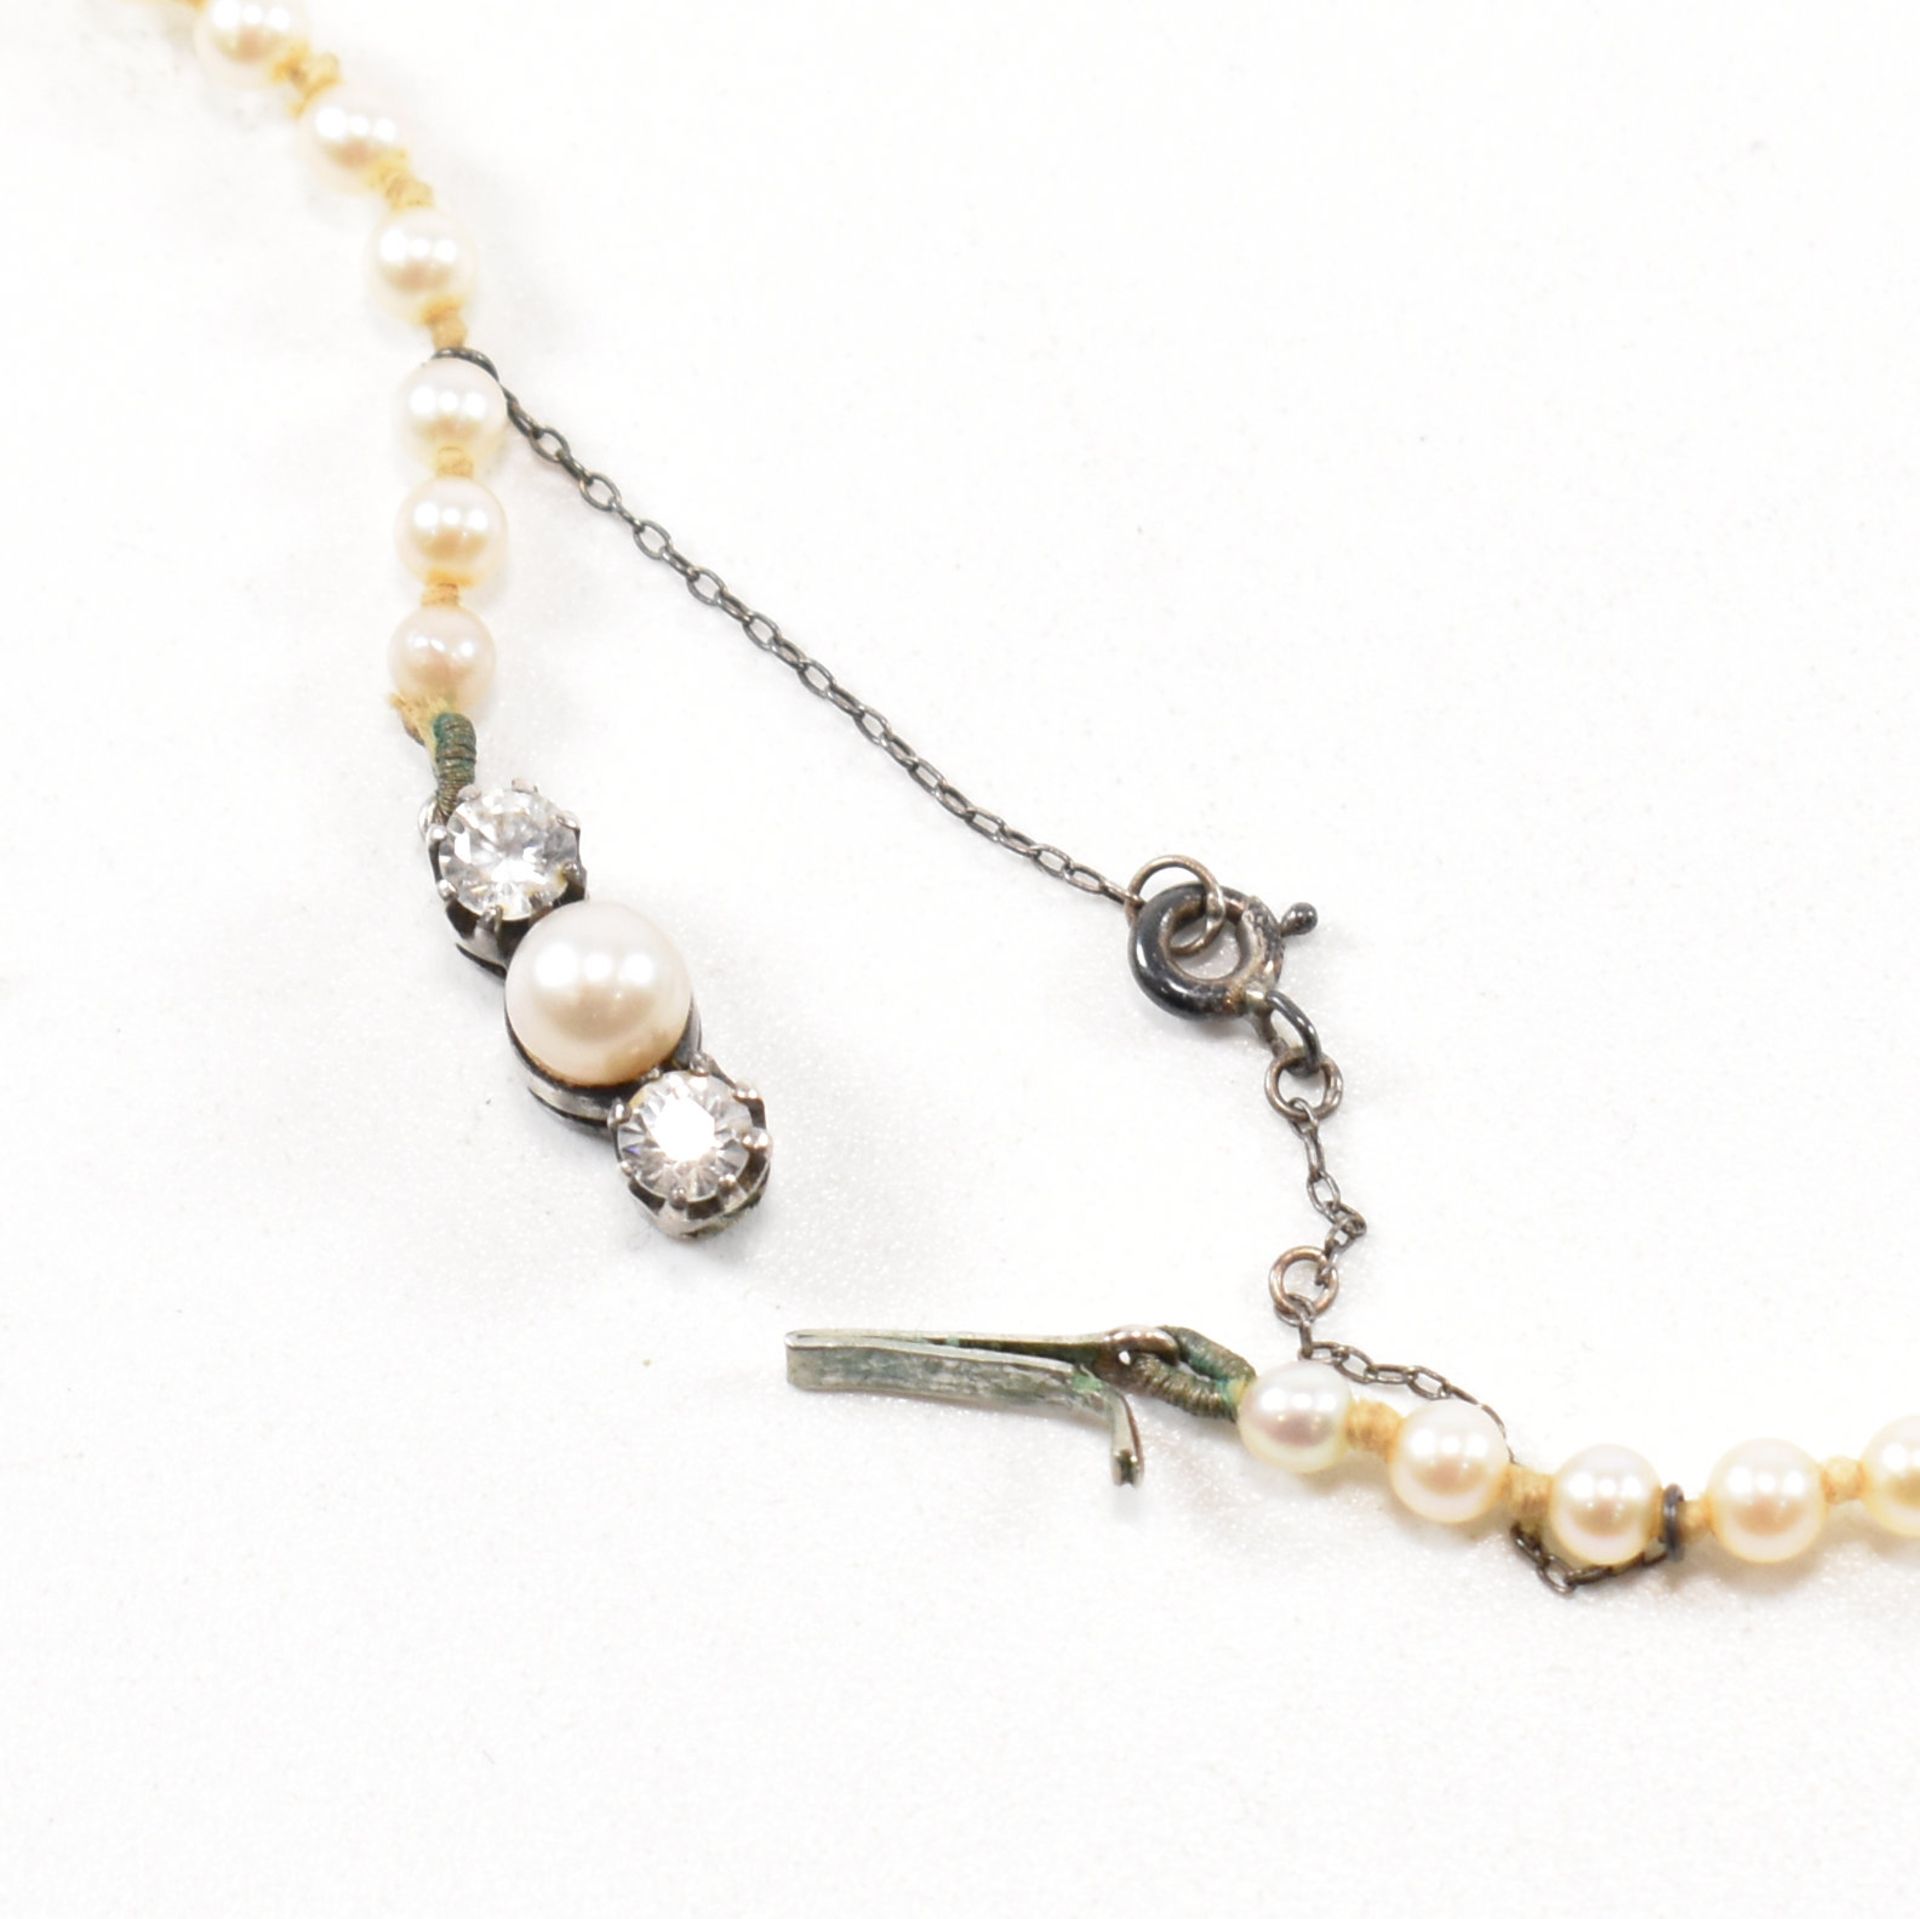 EARLY 20TH CENTURY CULTURED PEARL & SPINEL PEARL NECKLACE - Image 5 of 7